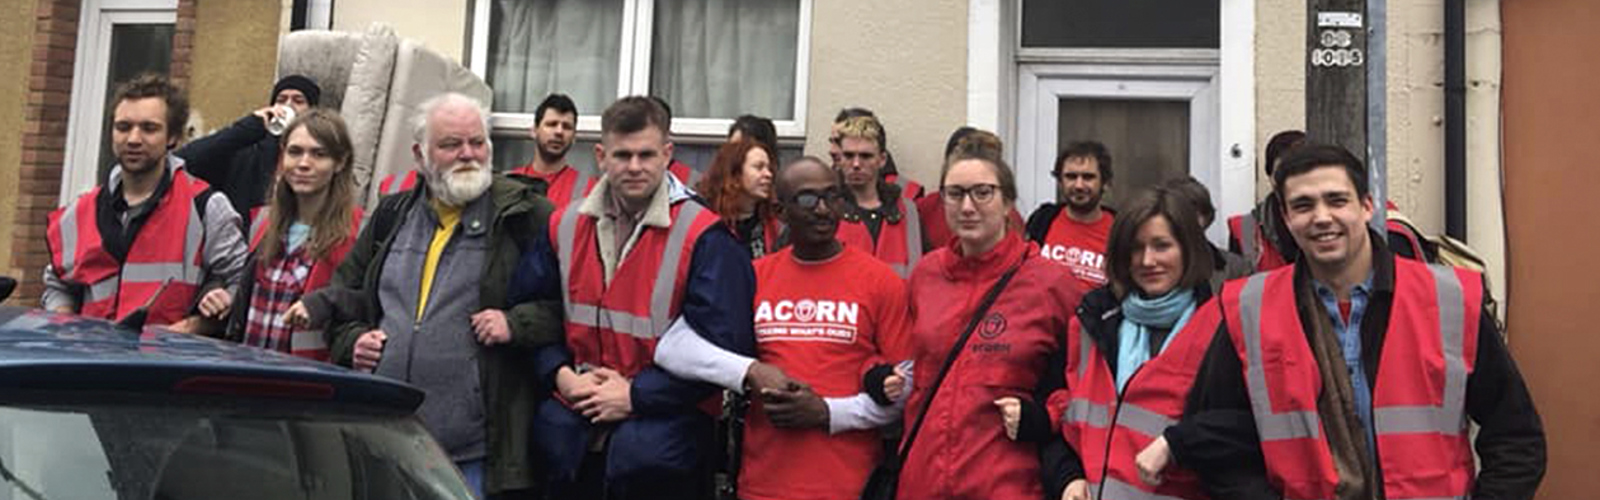 Housing campaigners in high-vis, standing in a line